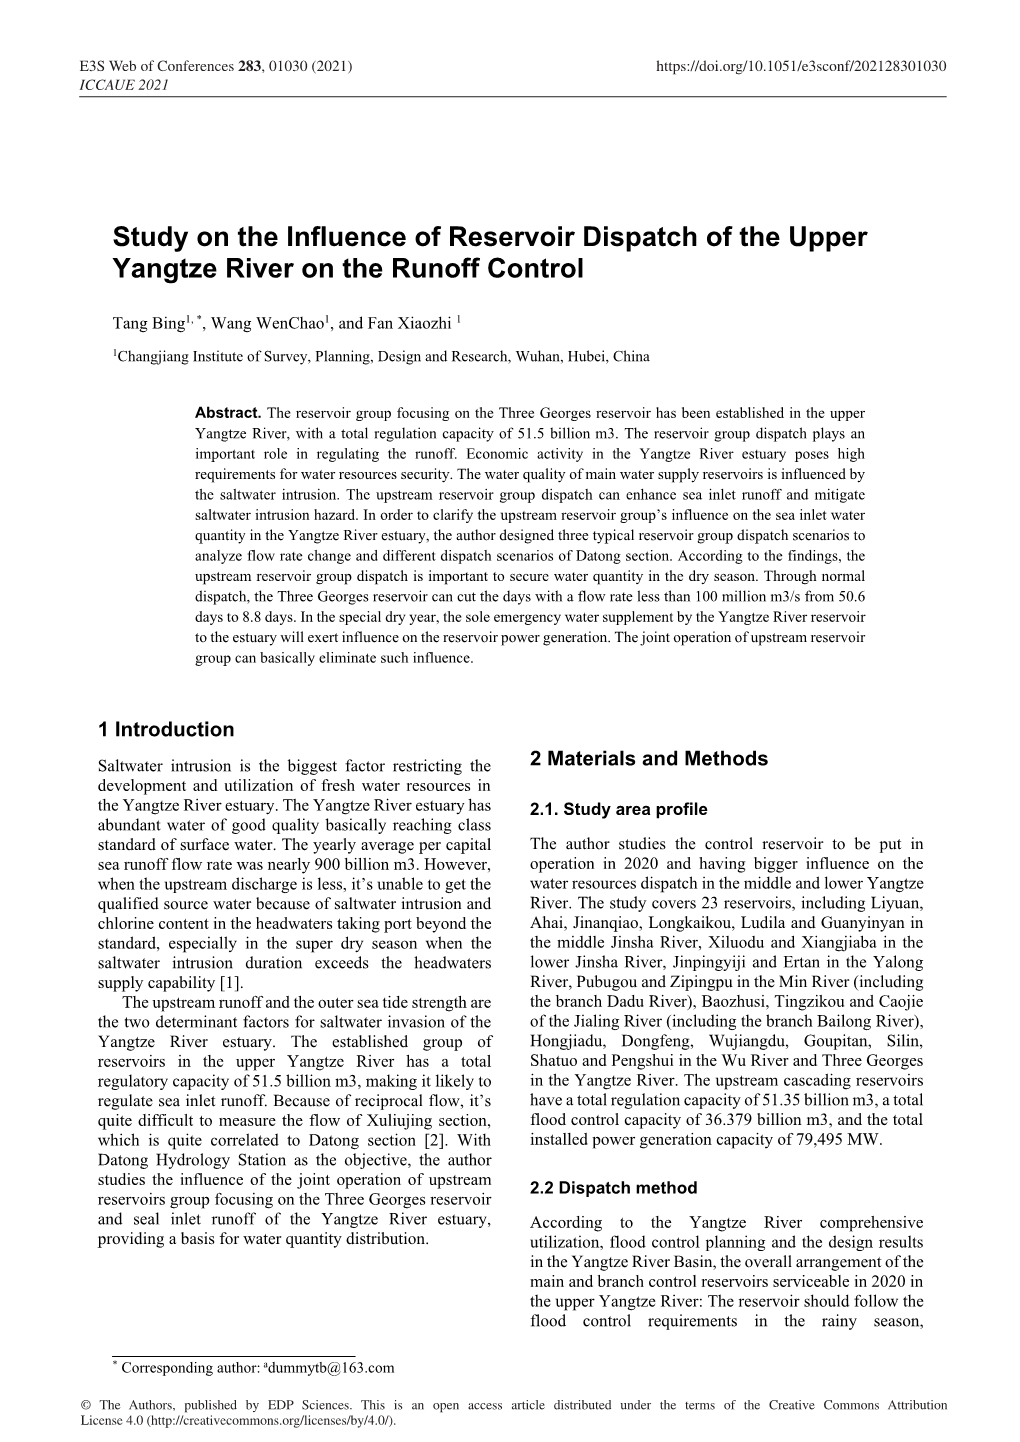 Study on the Influence of Reservoir Dispatch of the Upper Yangtze River on the Runoff Control